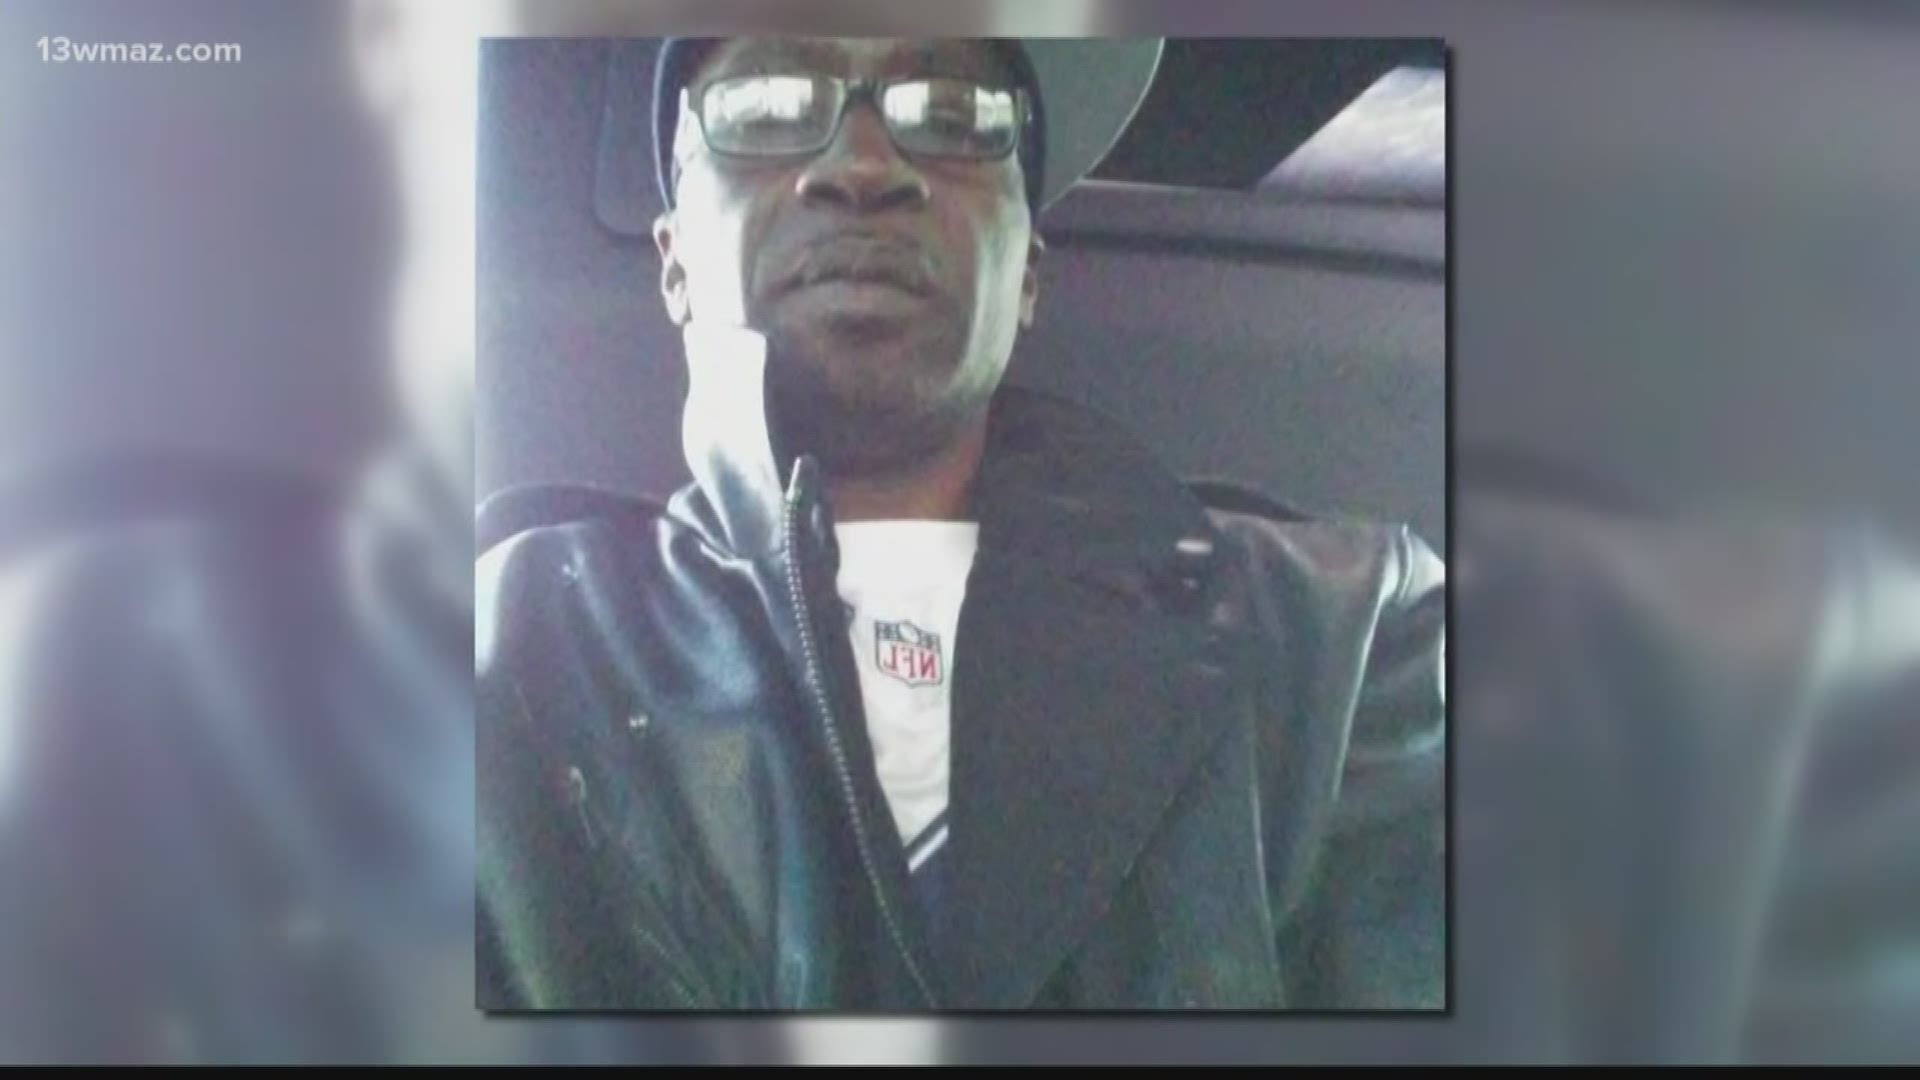 A family is still reeling after an accident Wednesday morning killed one Macon man at the Nichiha plant in south Macon.